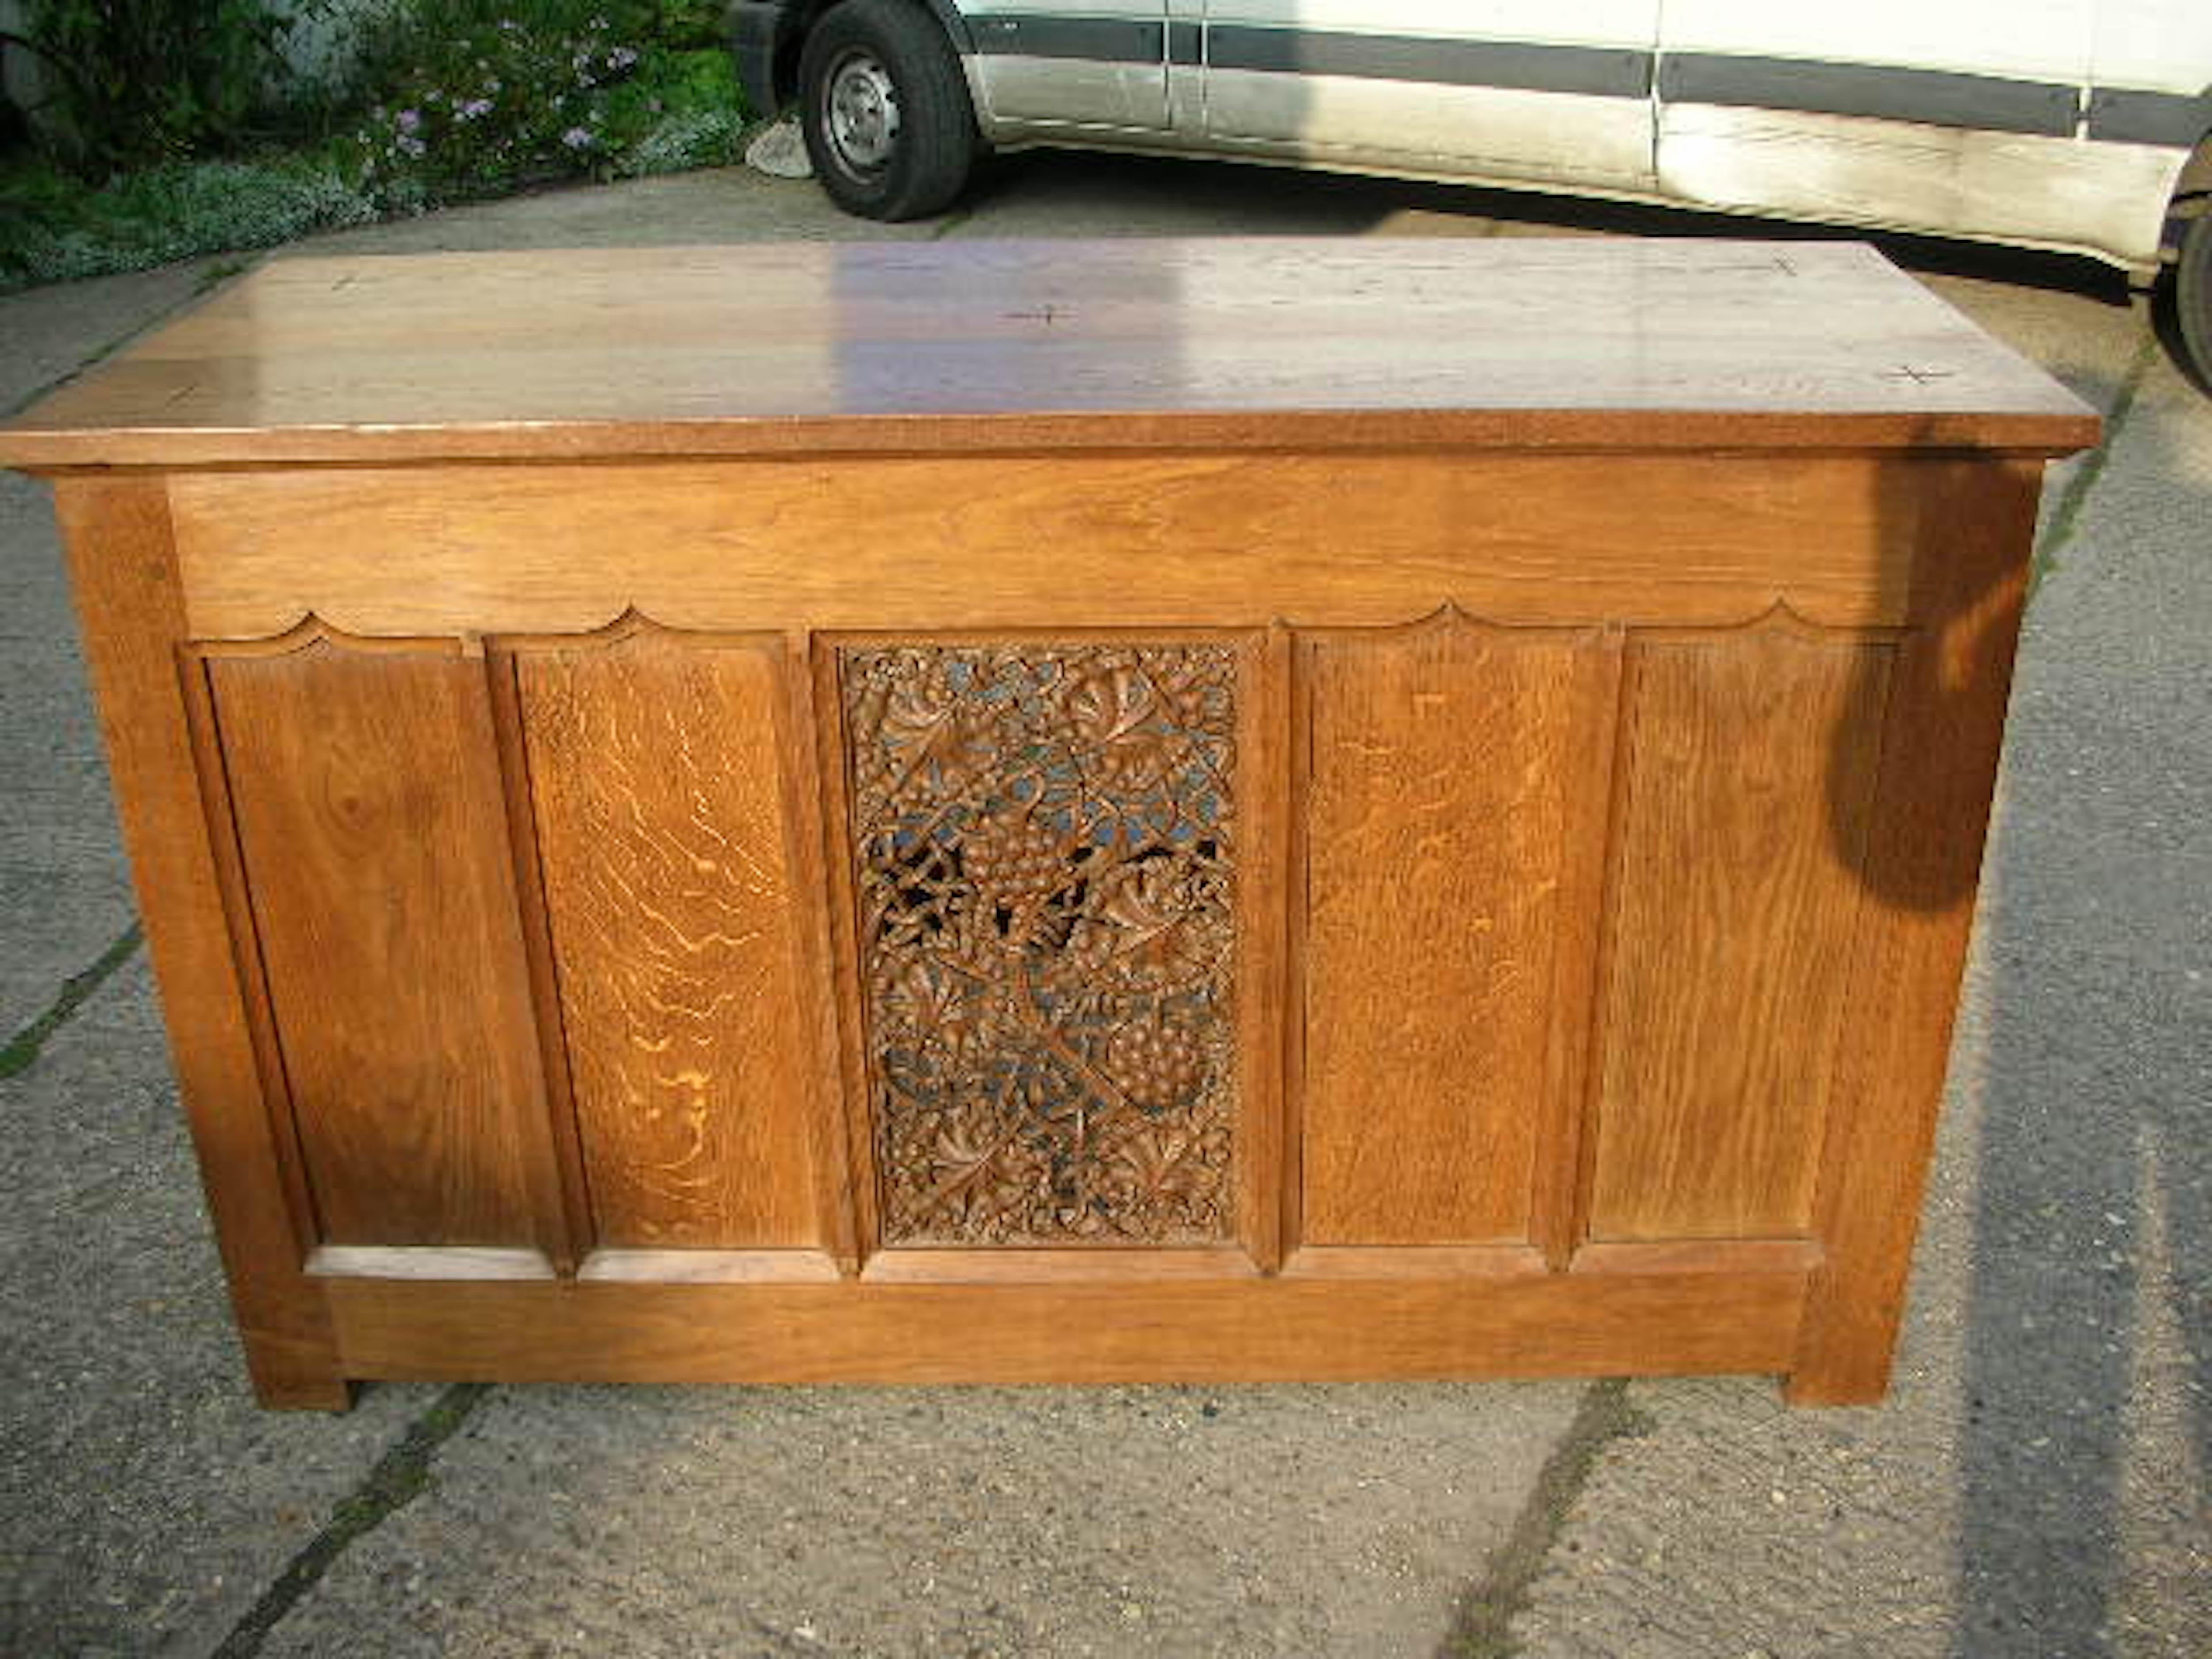 Arthur Simpson of Kendal attributed. 
A fine quality Arts and Crafts Gothic Revival style oak Altar, serving or buffet table with a finely carved center panel of fruiting vines, flanked by fielded panels with subtly arched details to the top, and